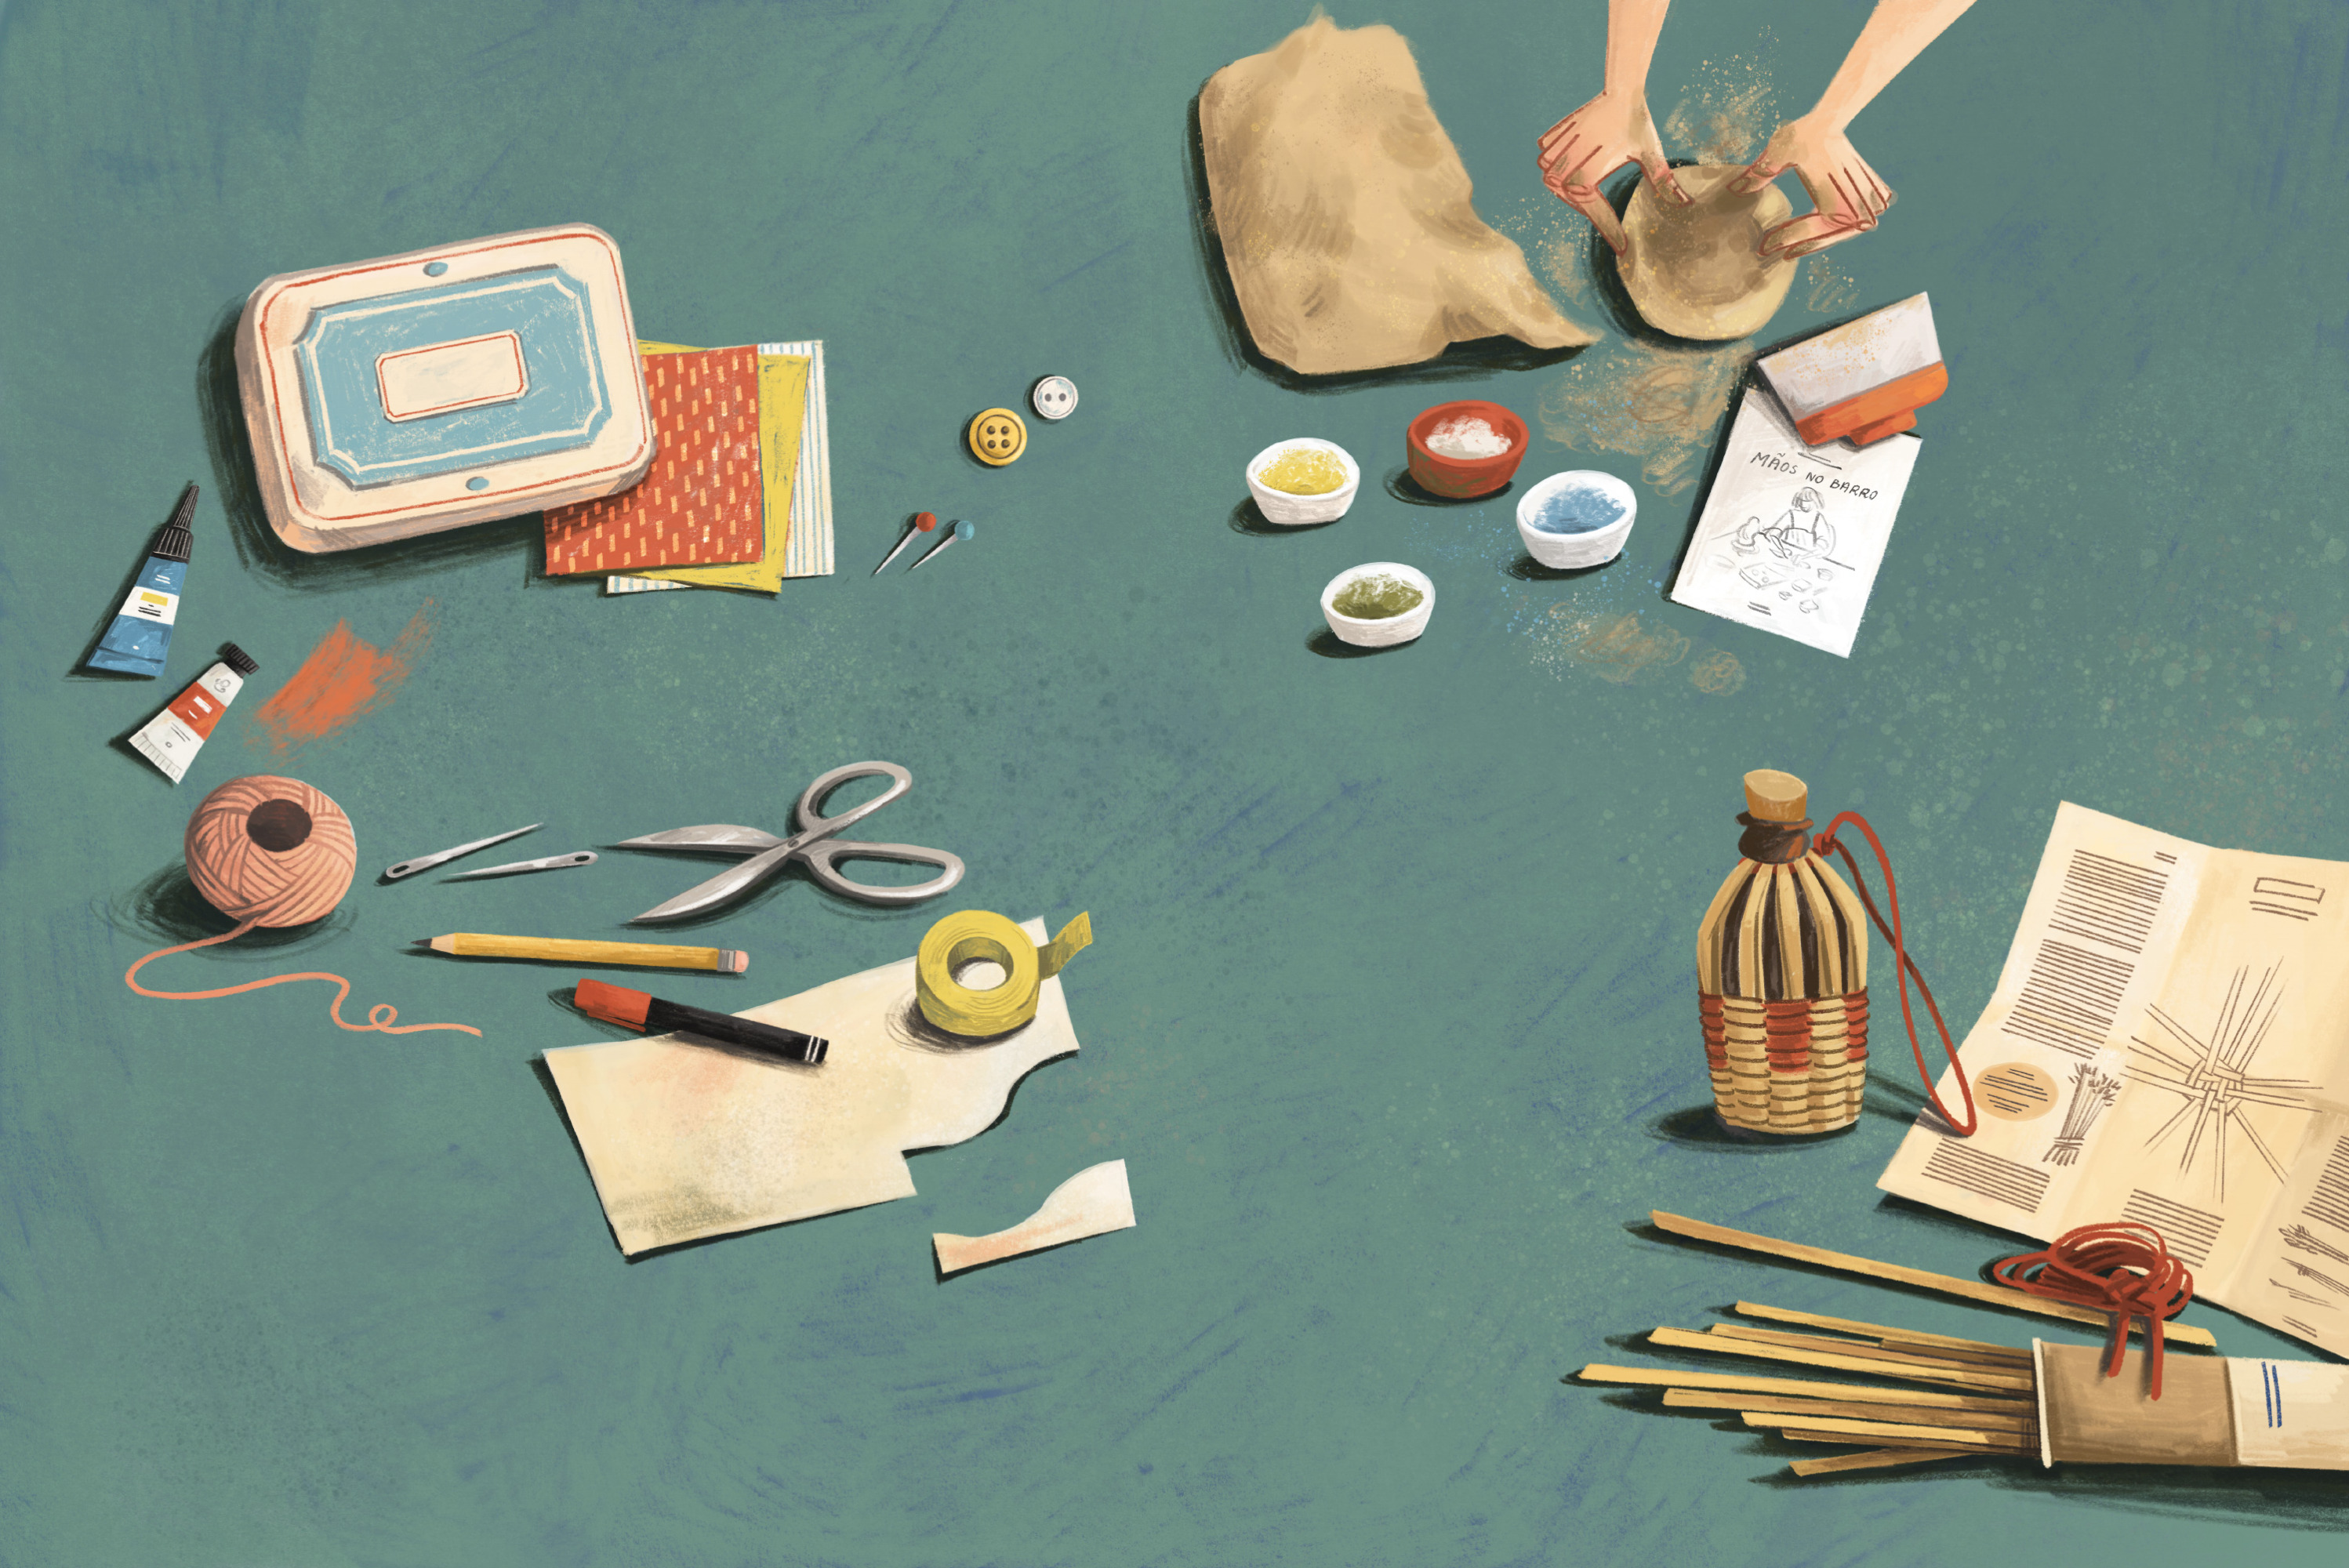 Illustration of Do-It-Yourself Kits